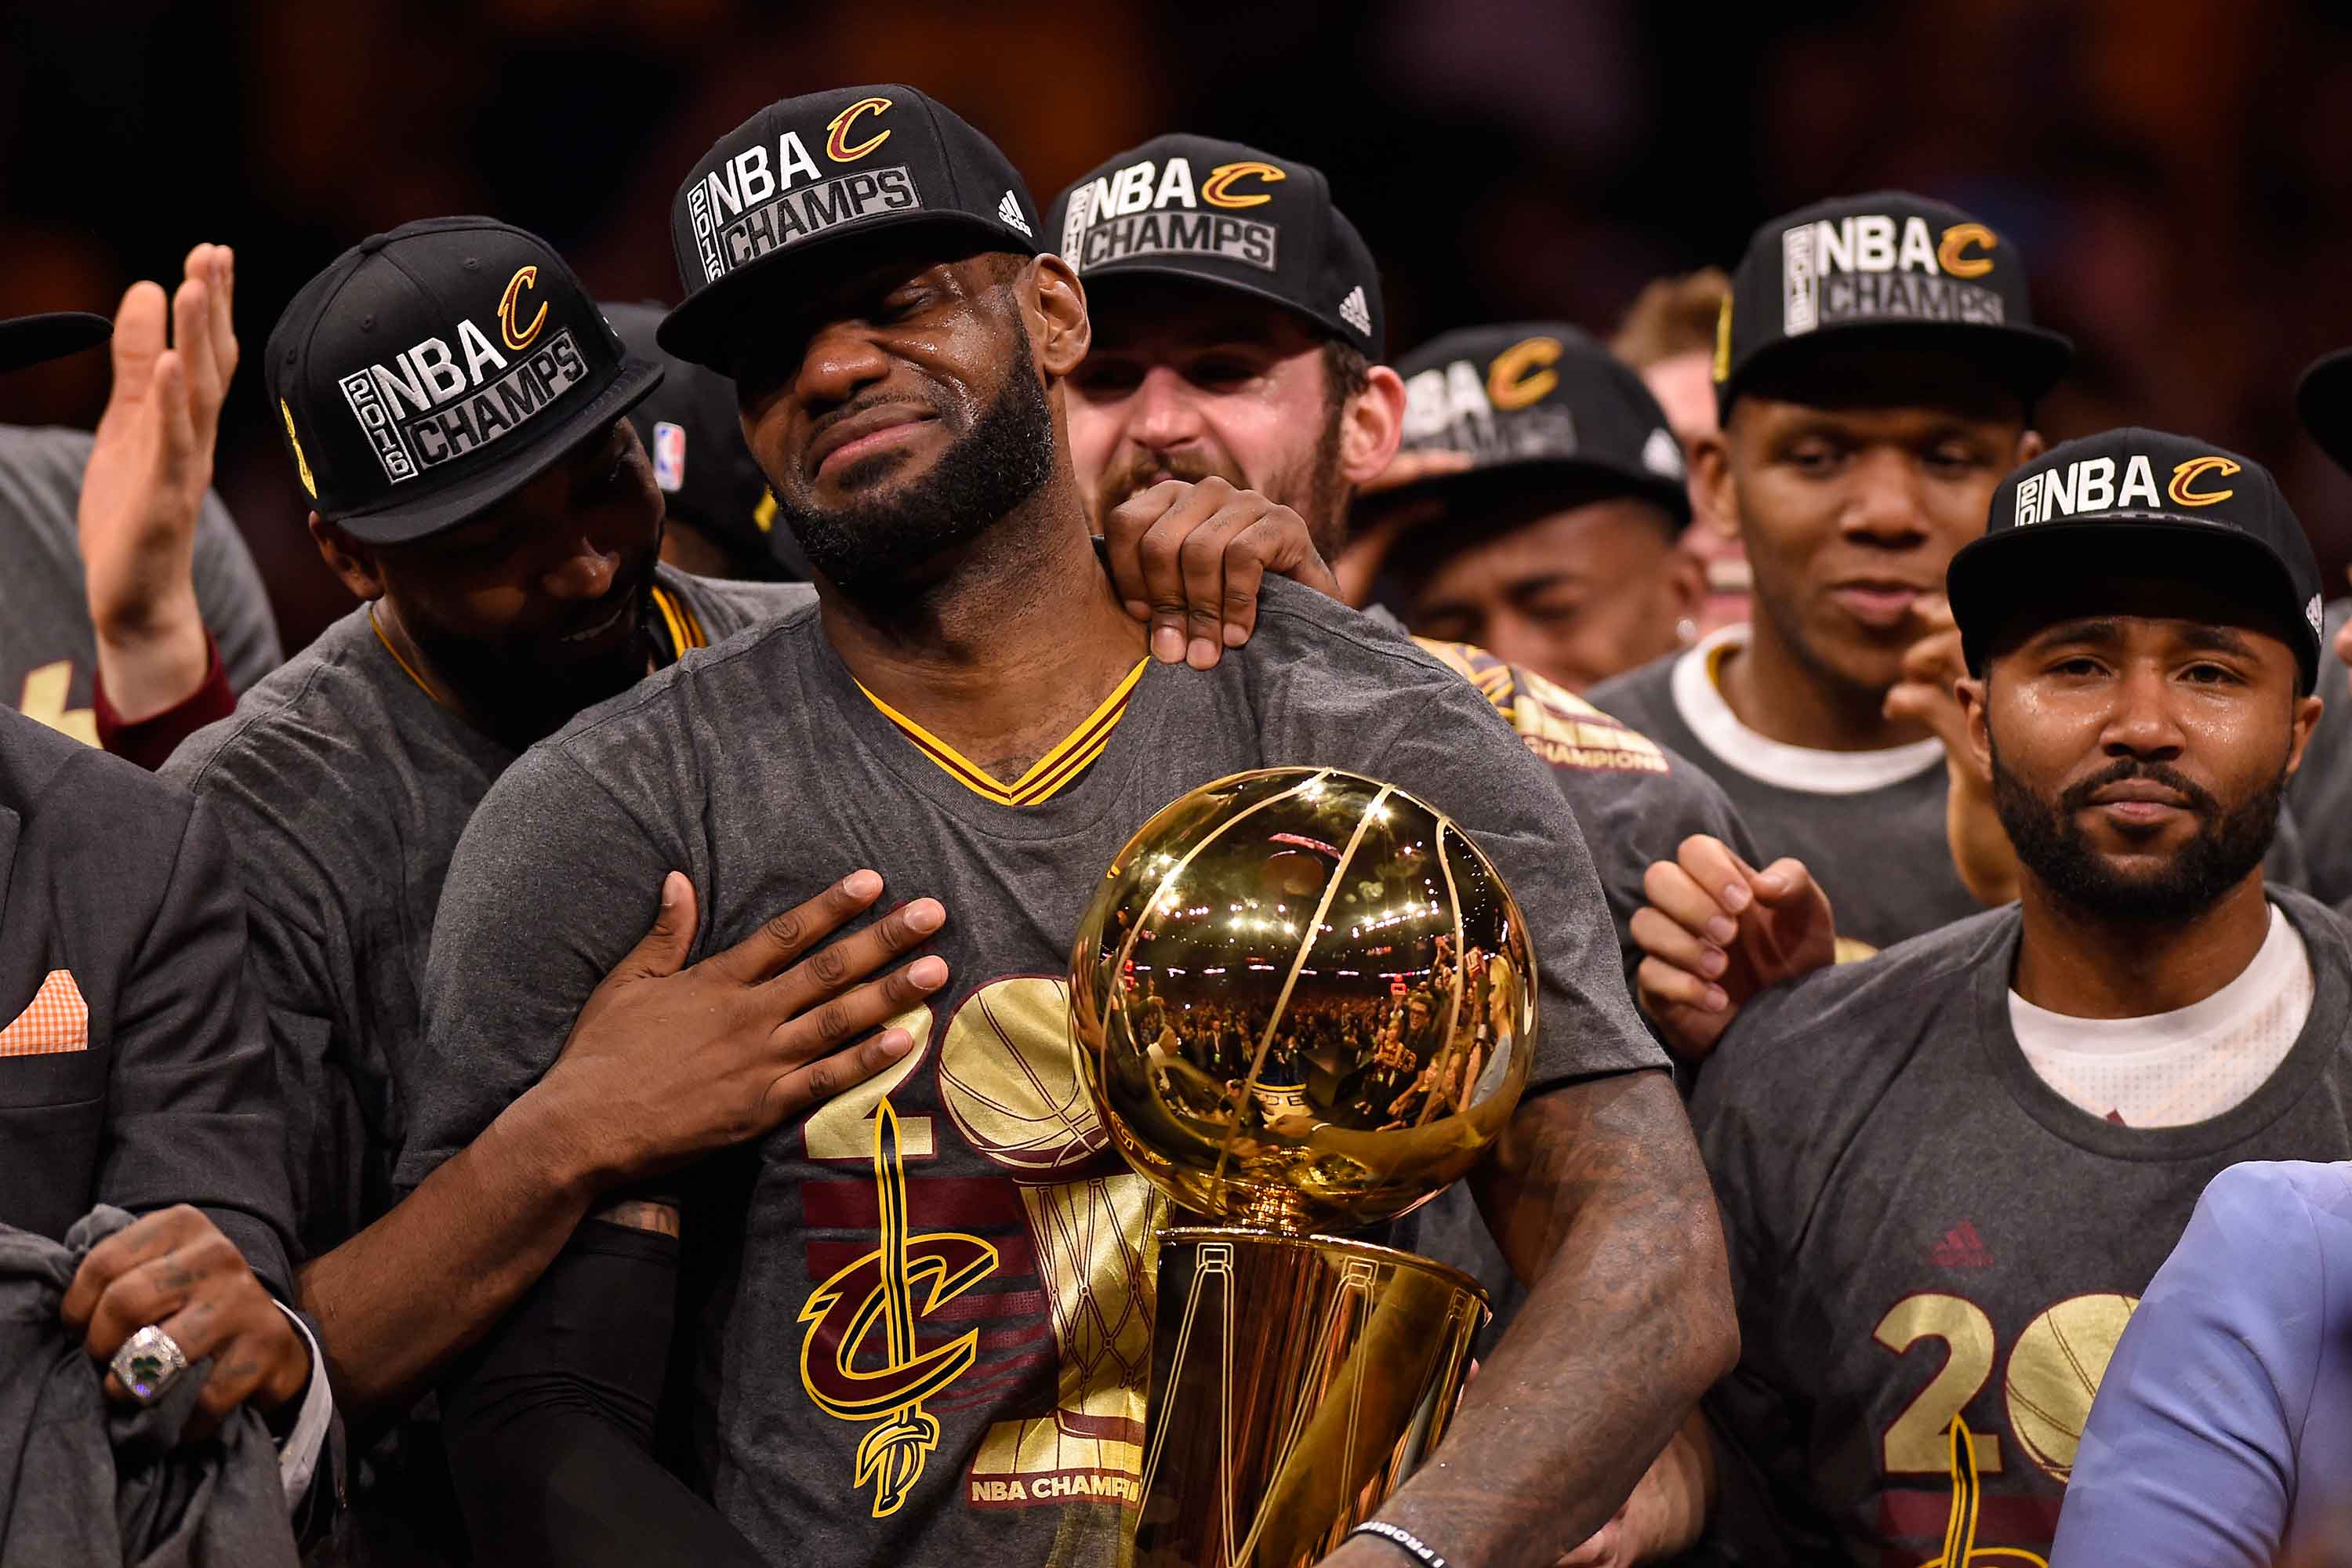 LeBron James, Kyrie Irving lead Cavs to improbable NBA title